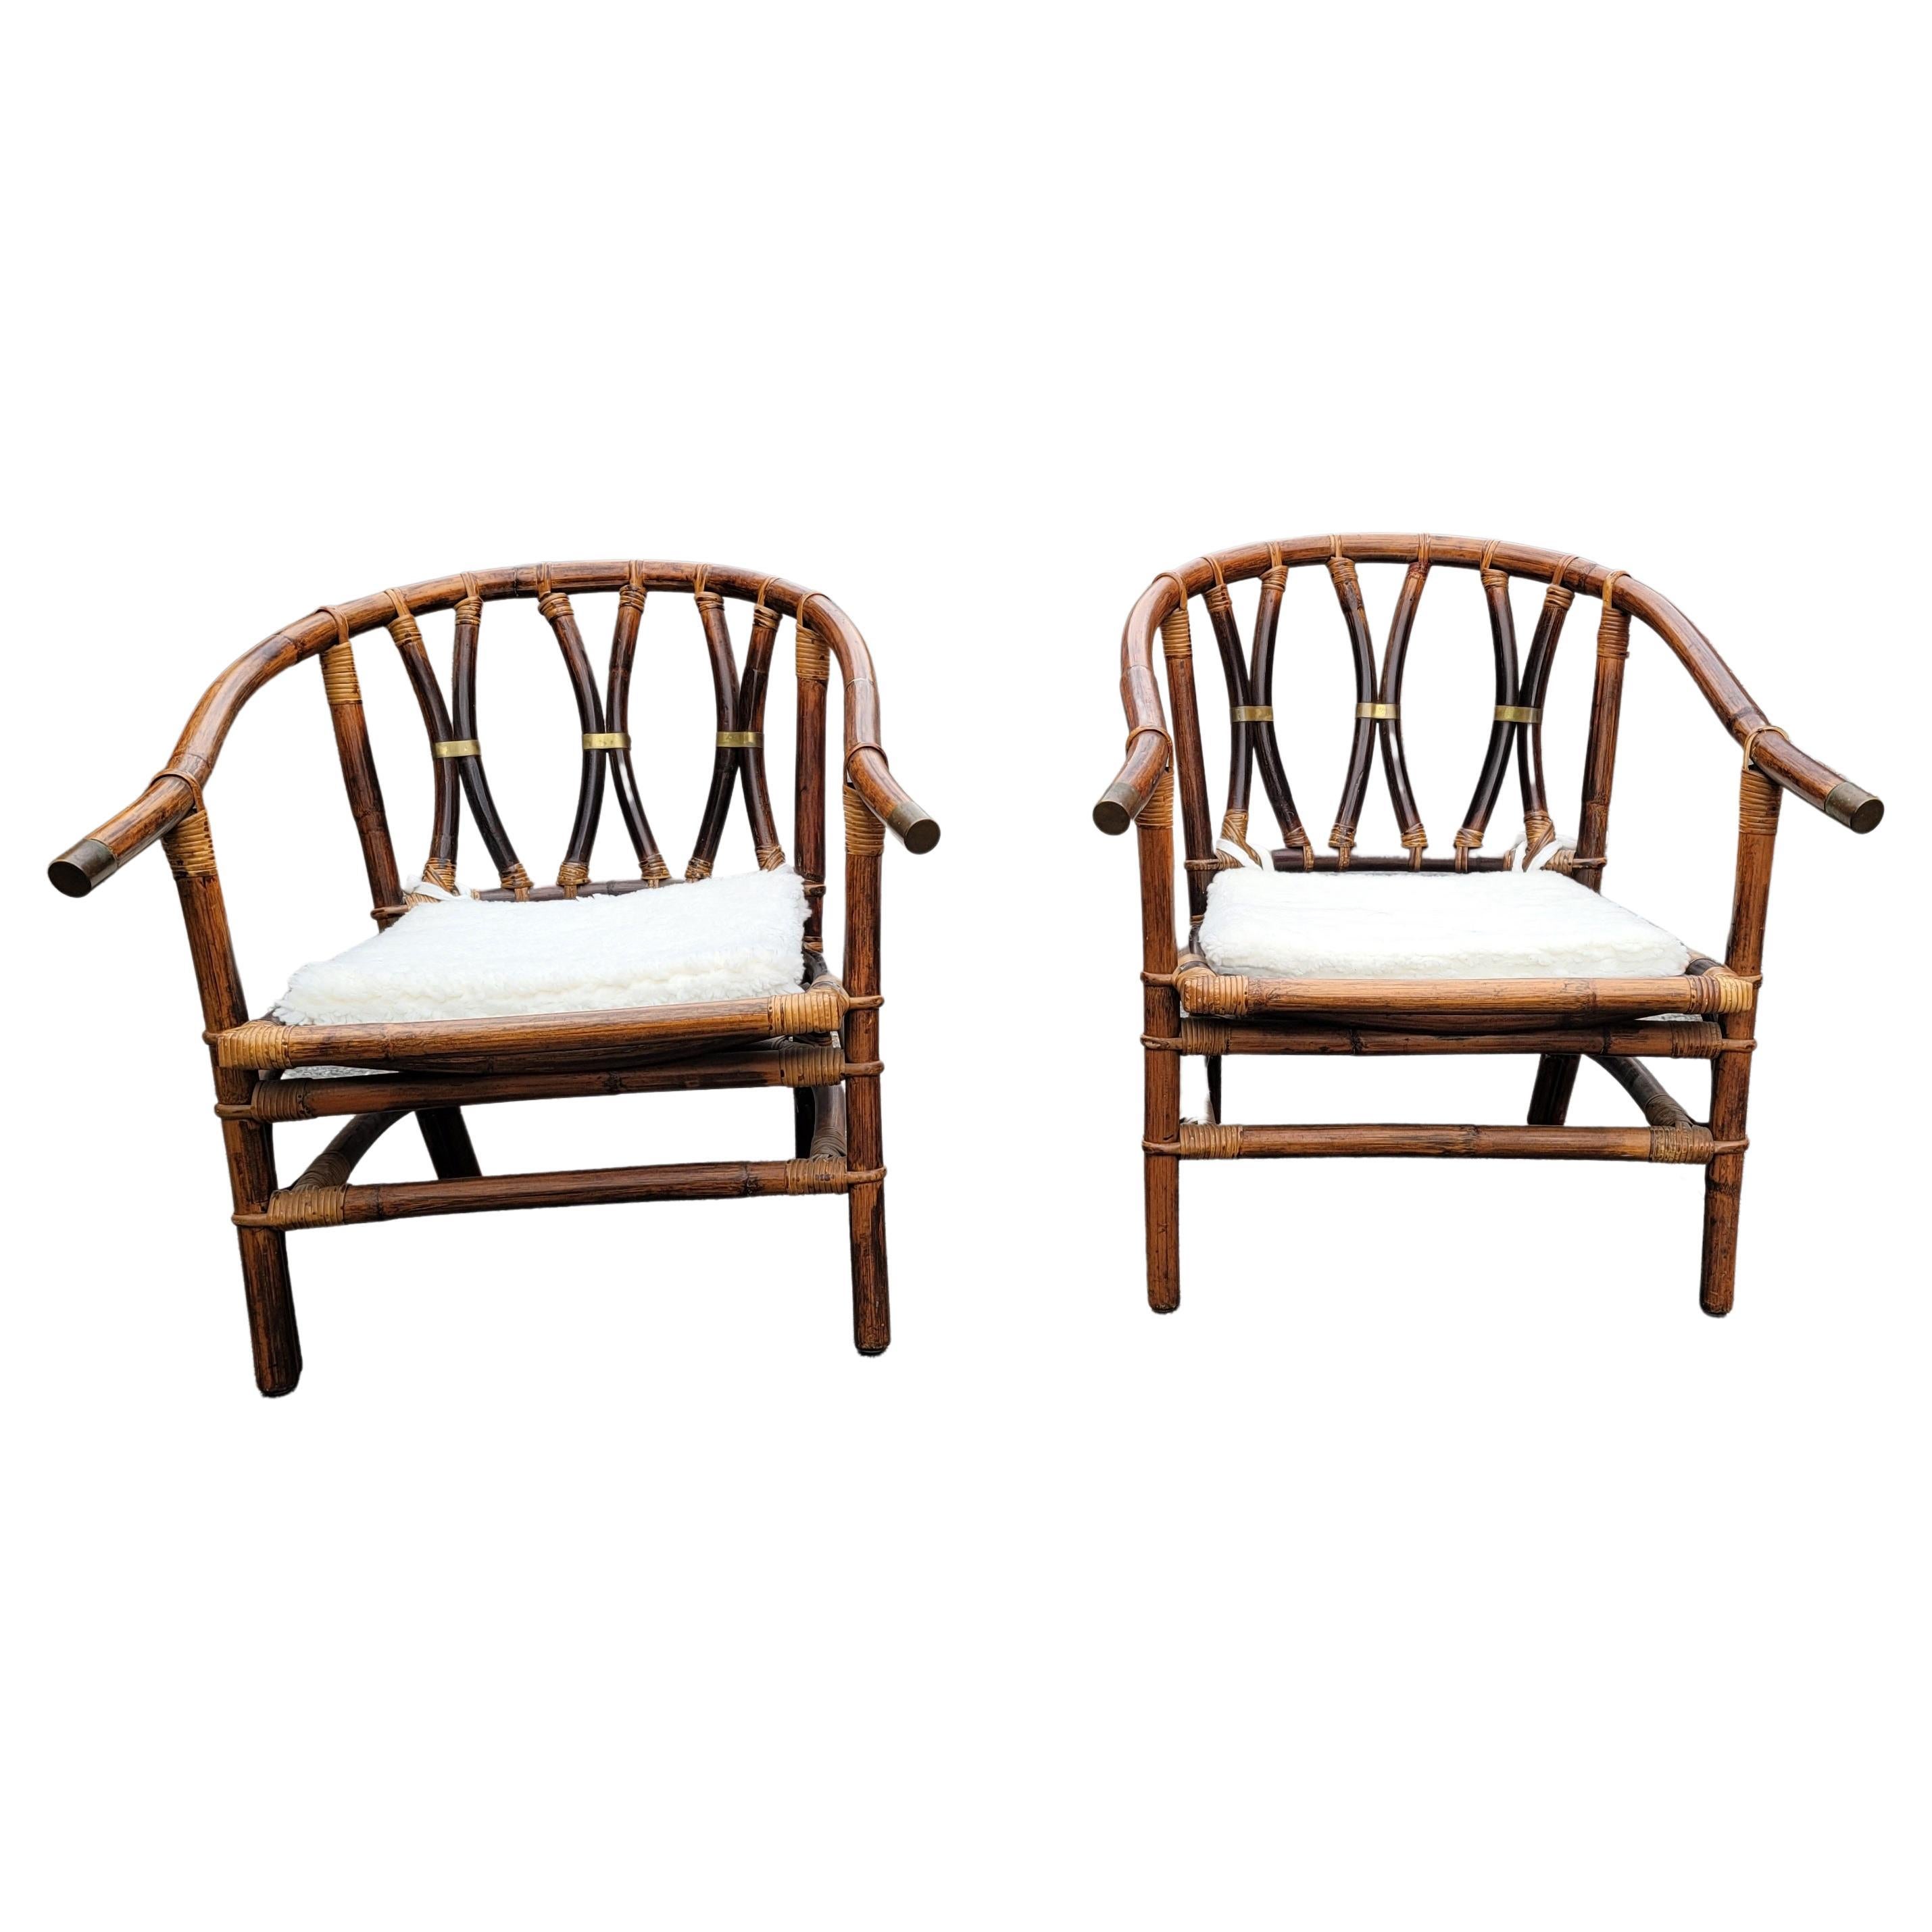 Pair of 1954 John Wisner for Ficks Reed Campaign Style Rattan Lounge Chairs